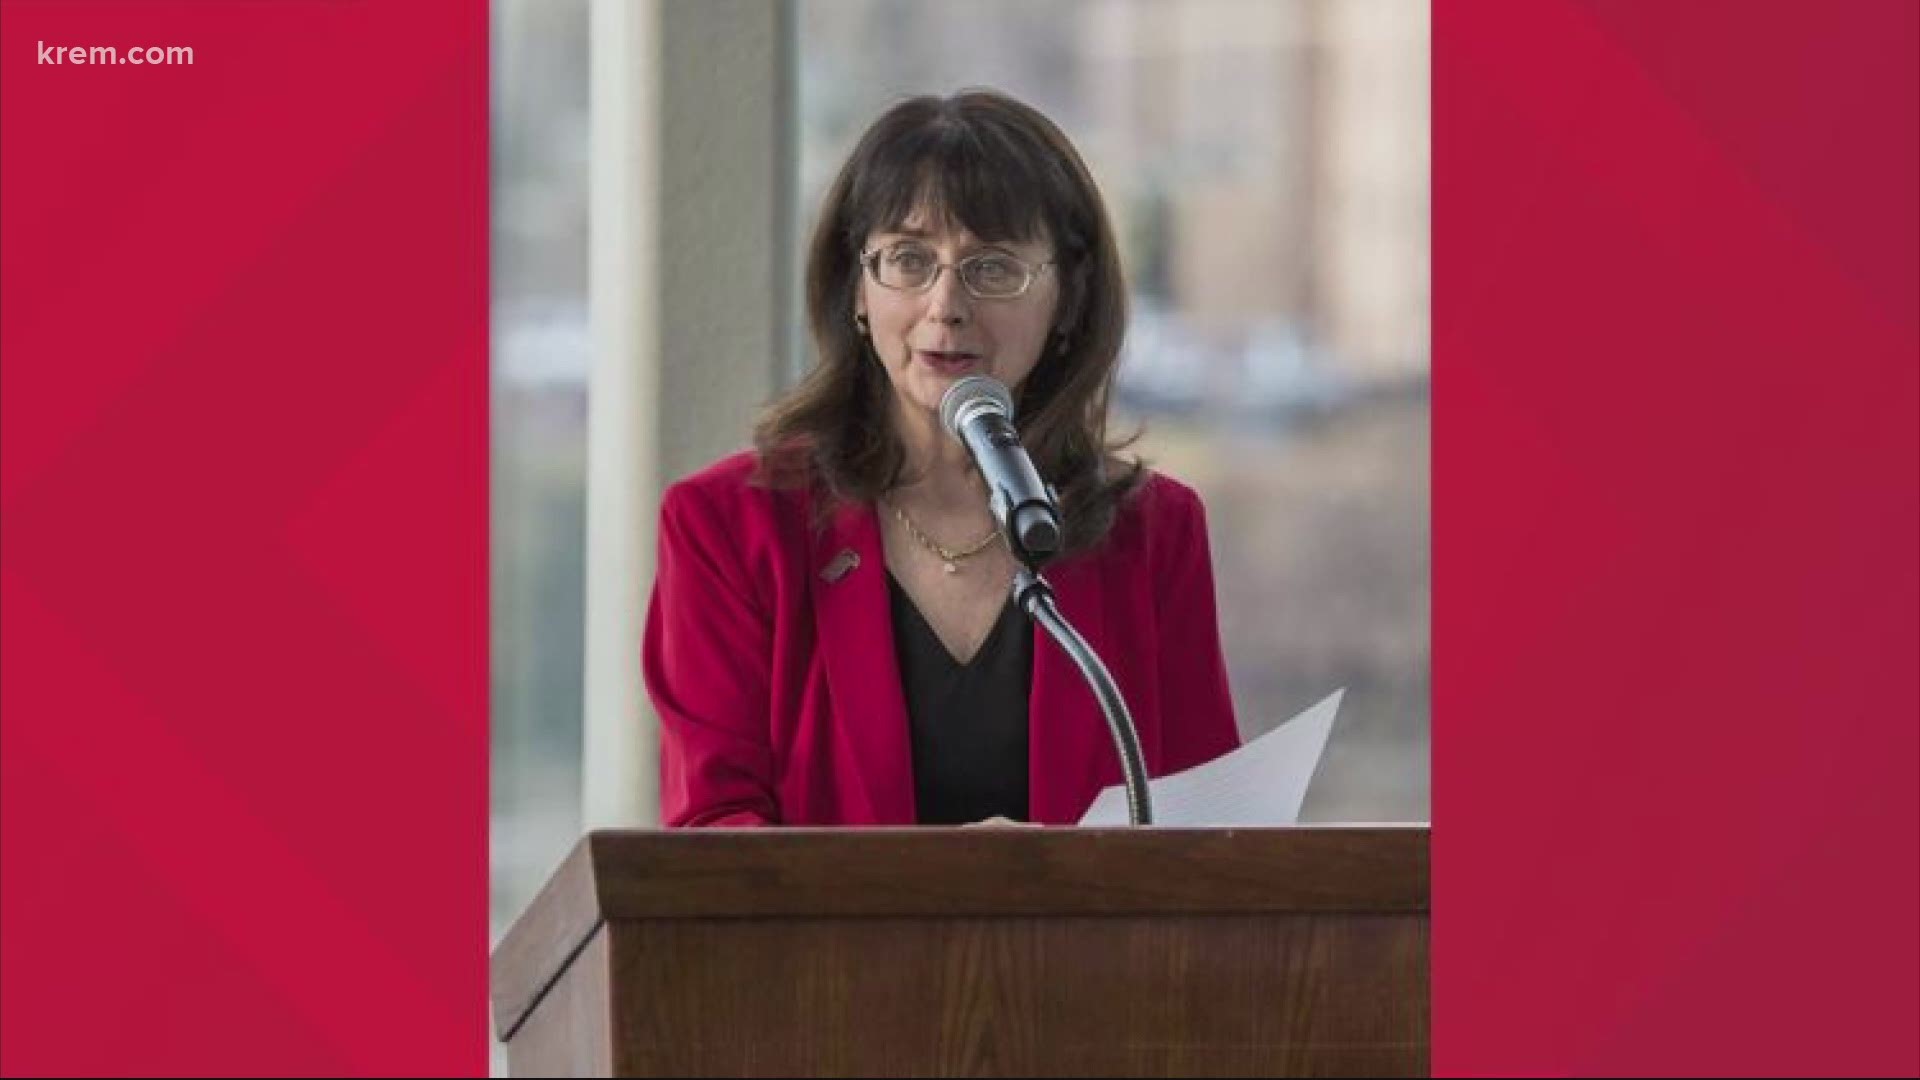 Eastern Washington University held an emergency meeting Tuesday morning where the university's president stepped down from her position.